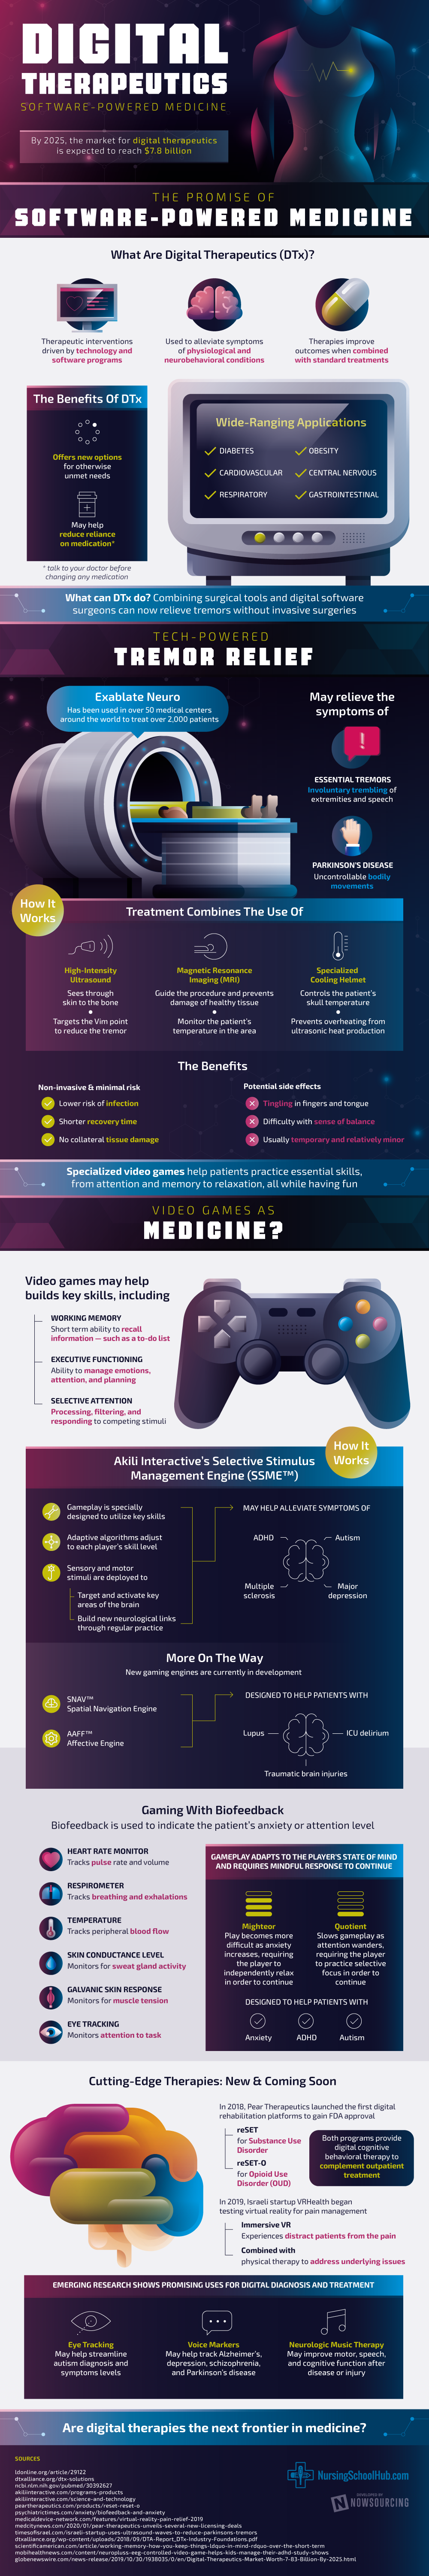 Video Games As Medicine: Treatment For ADHD, Autism, Multiple Sclerosis, & More